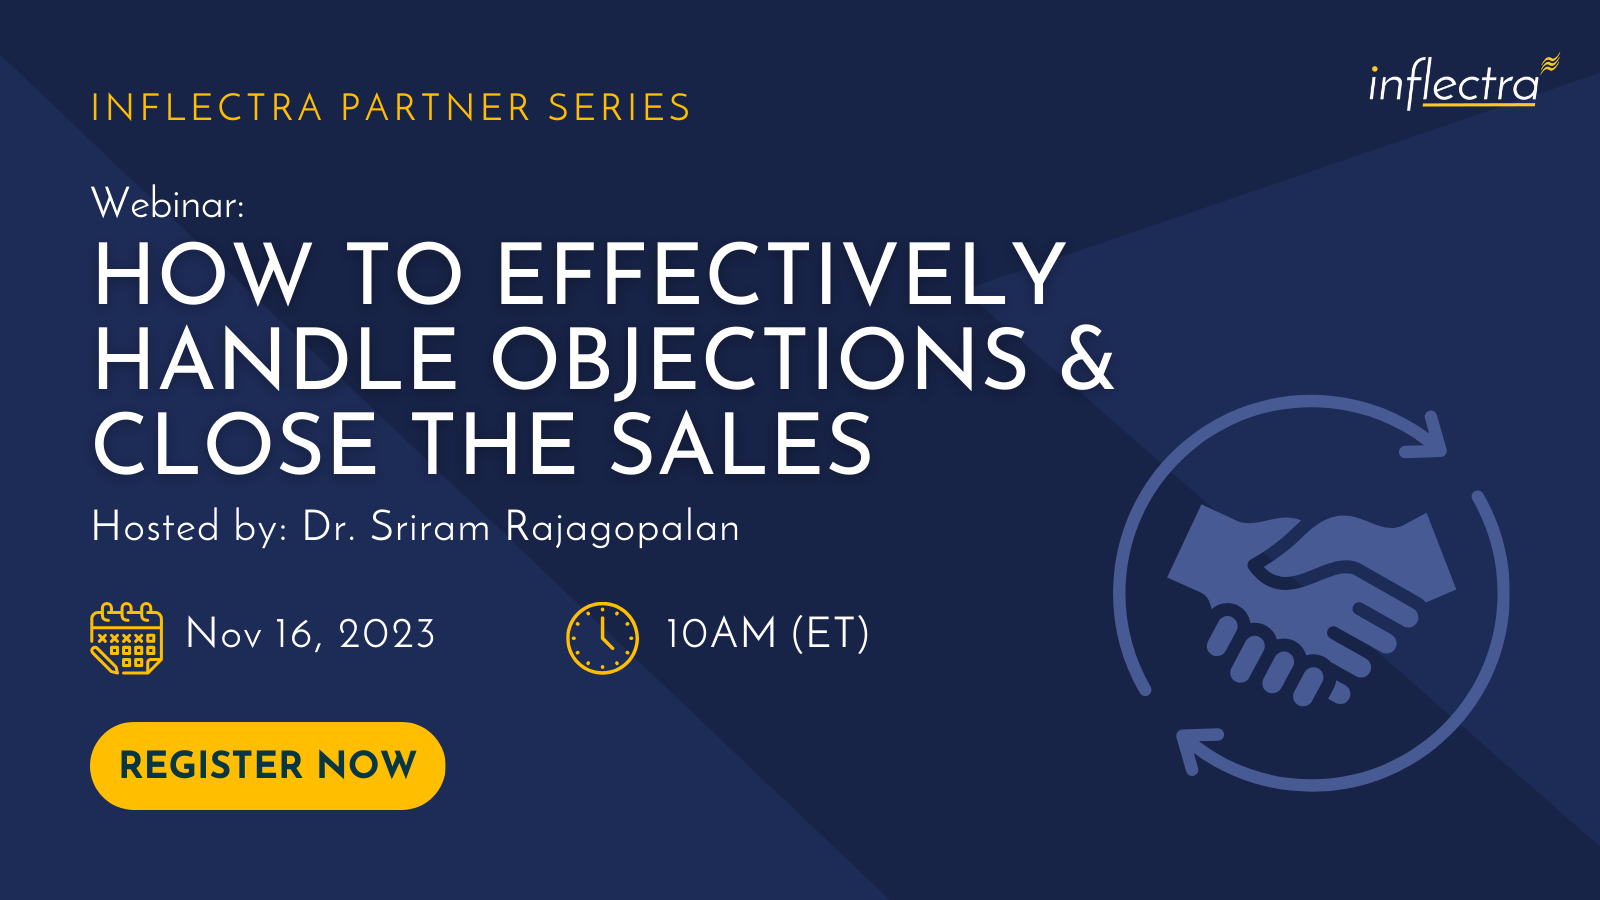 inflectra-partner-series-how-to-effectively-handle-objections-and-close-the-sales-webinar-series